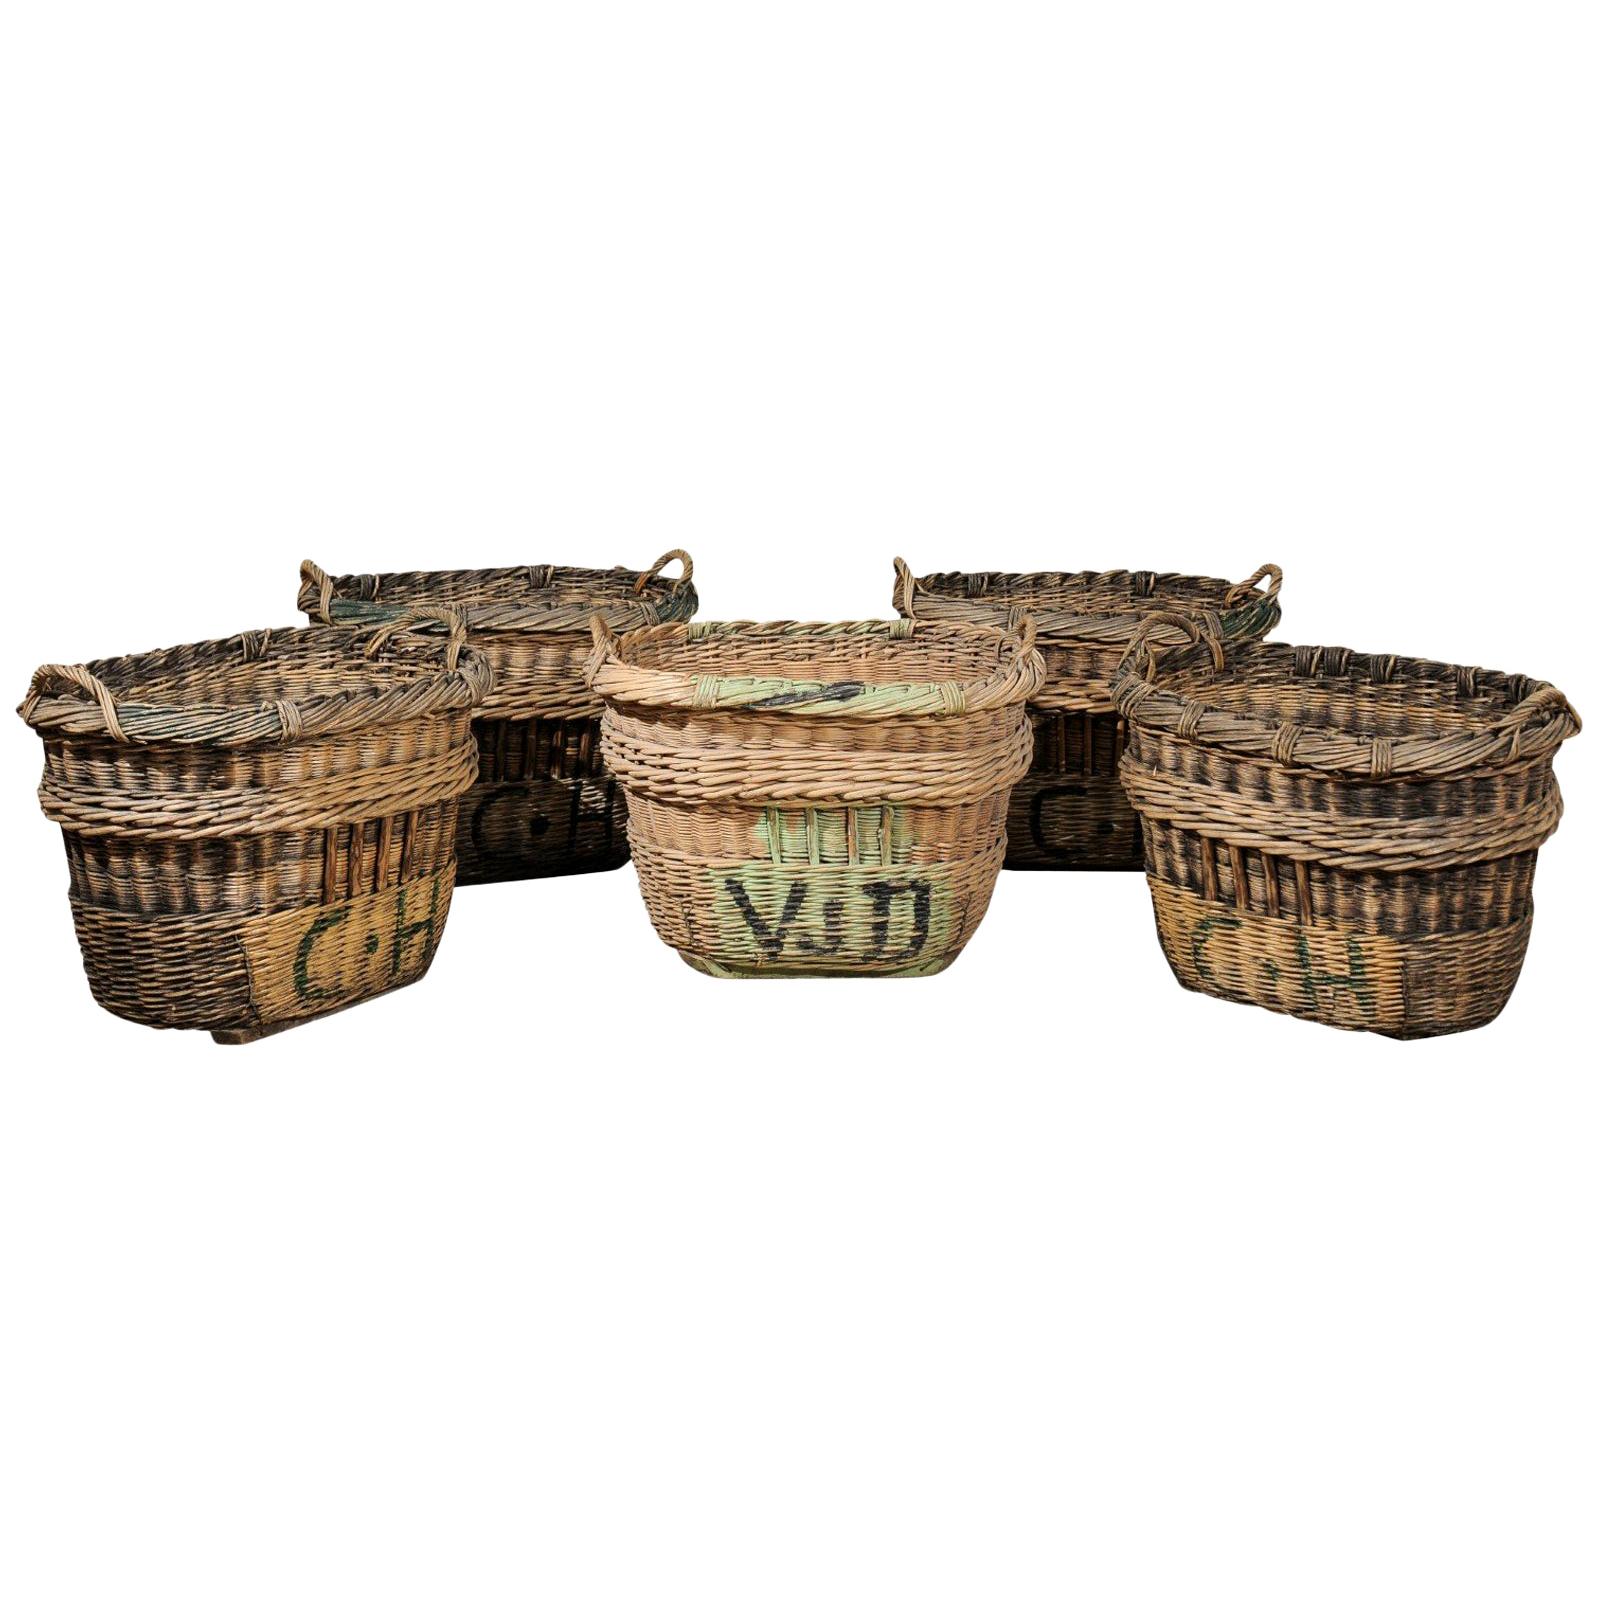 Large French Wicker Basket circa 1900 with Weathered Appearance 'One Left'